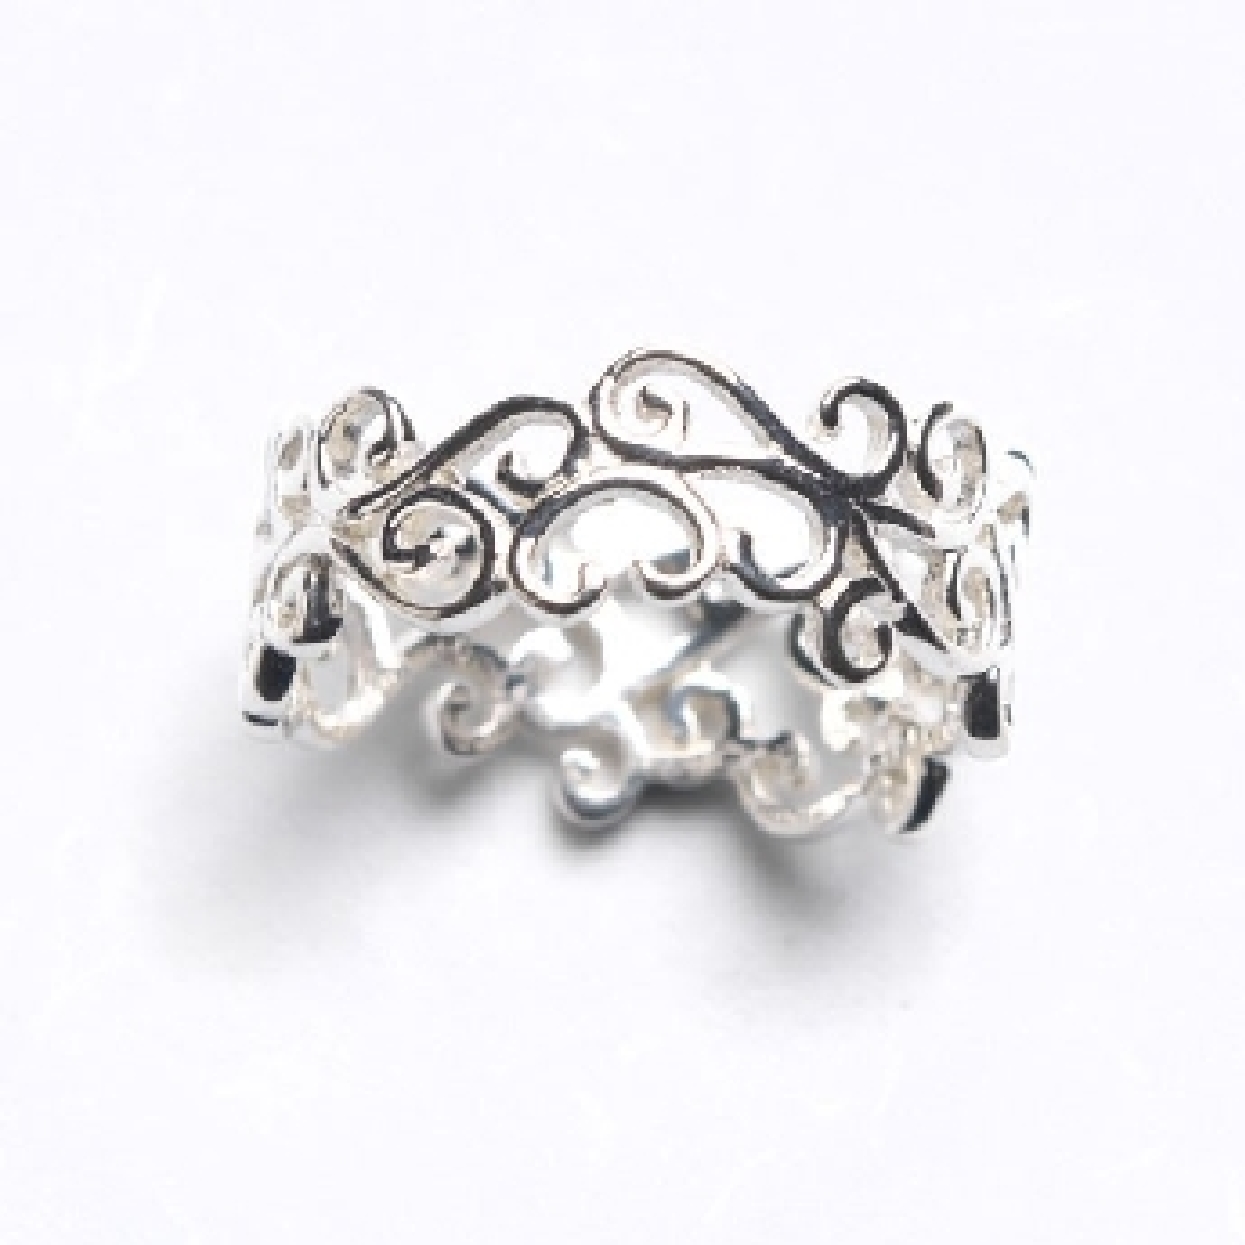 Sterling silver Courtyard Scroll Ring
from the Southern Gates® Courtyard Series. Size 10. R155/10